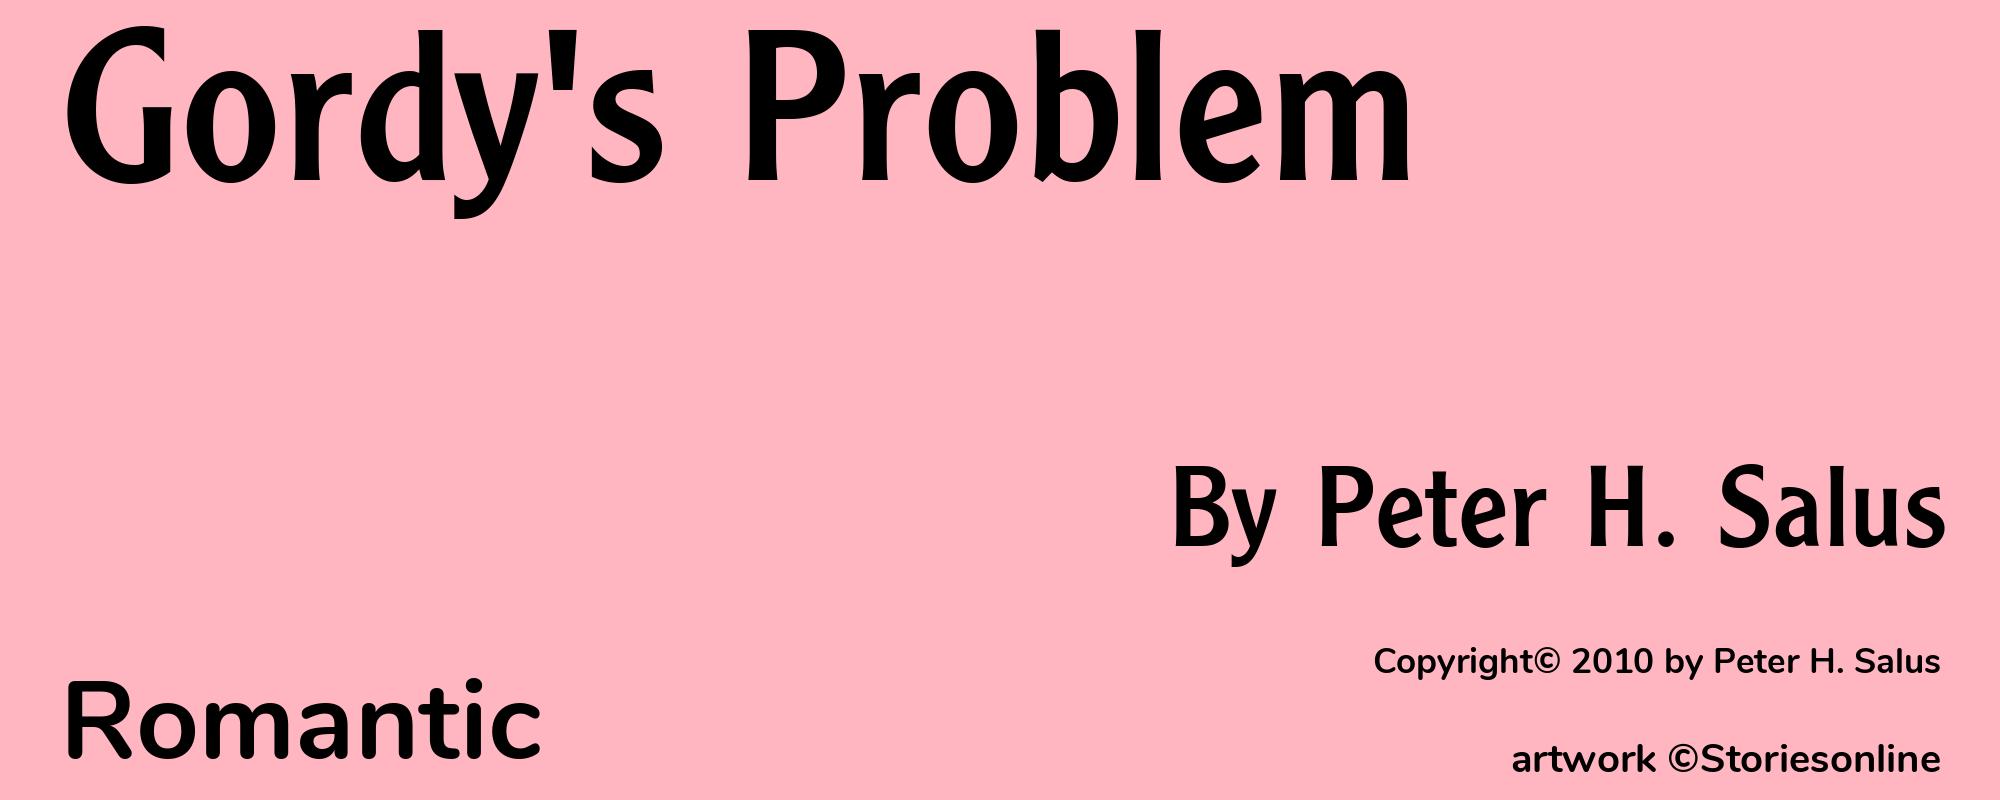 Gordy's Problem - Cover